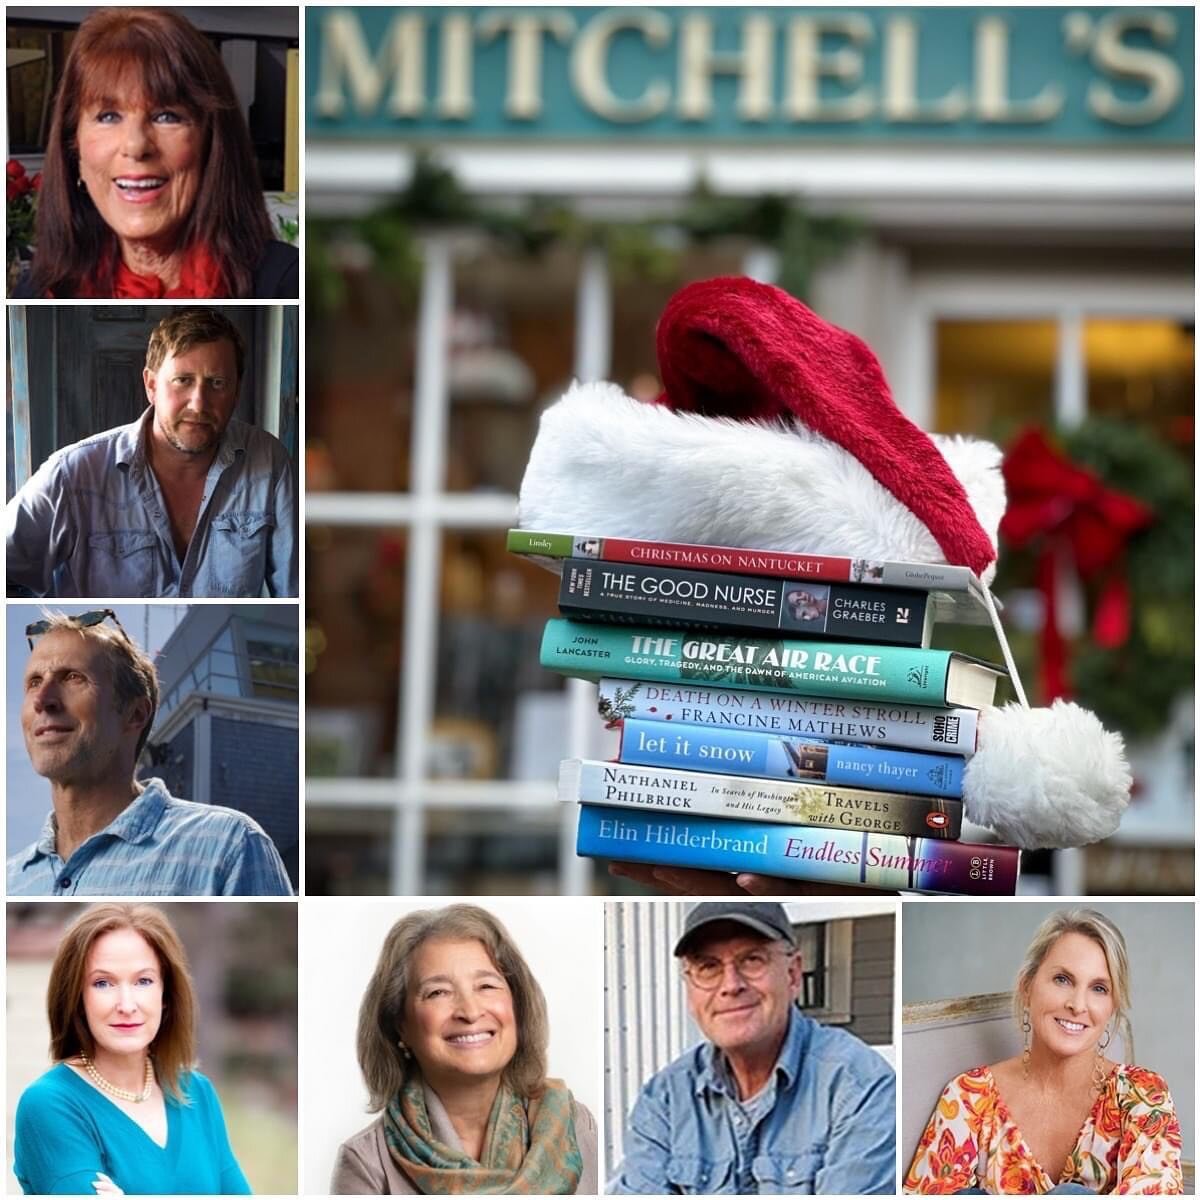 I'll be doing a book signing this coming weekend during the Nantucket Christmas Stroll with @nantucketbooks! Come see me for &quot;Stroll Signing Saturday&quot; on December 3rd going on all day from 10AM - 5:30PM at @mitchellsbookcorner. Here's the f